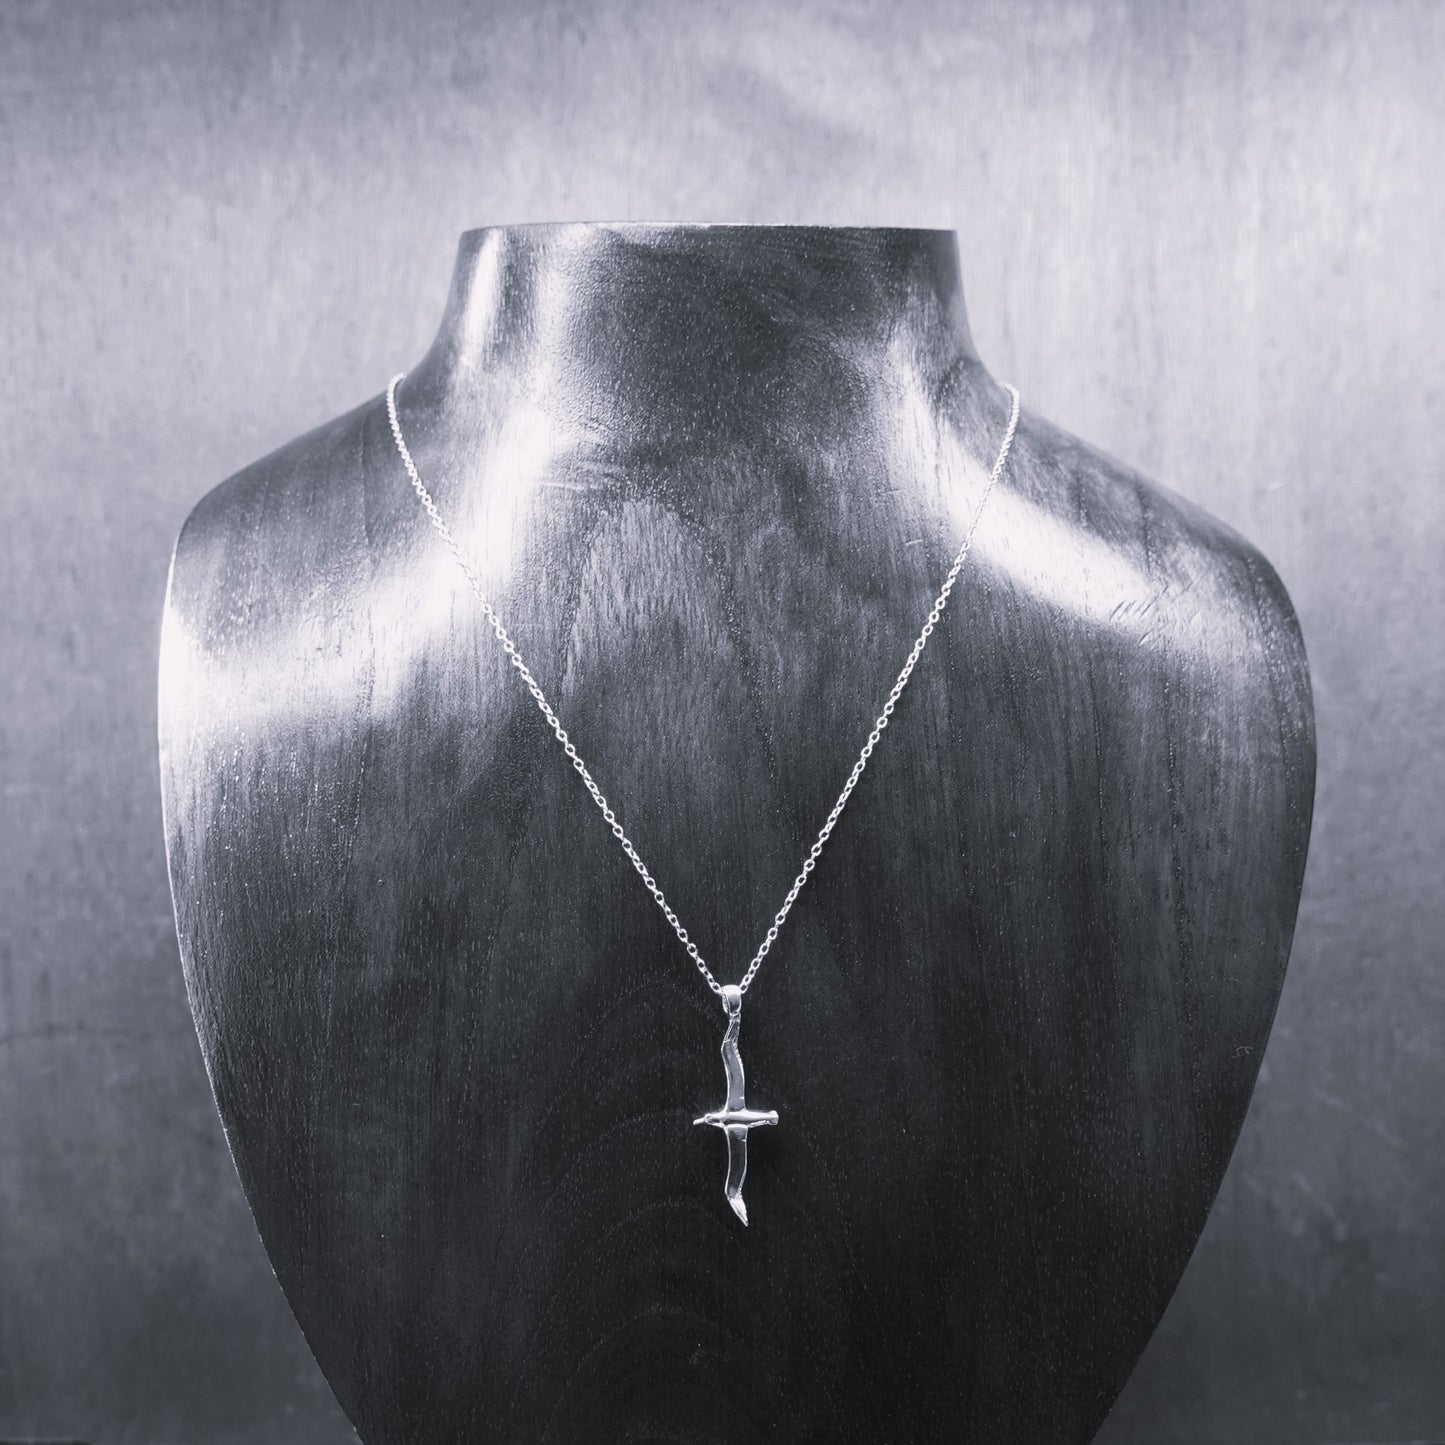 Platinum Albatross charm with a solid platinum chain. Made to order. © Adrian Ashley